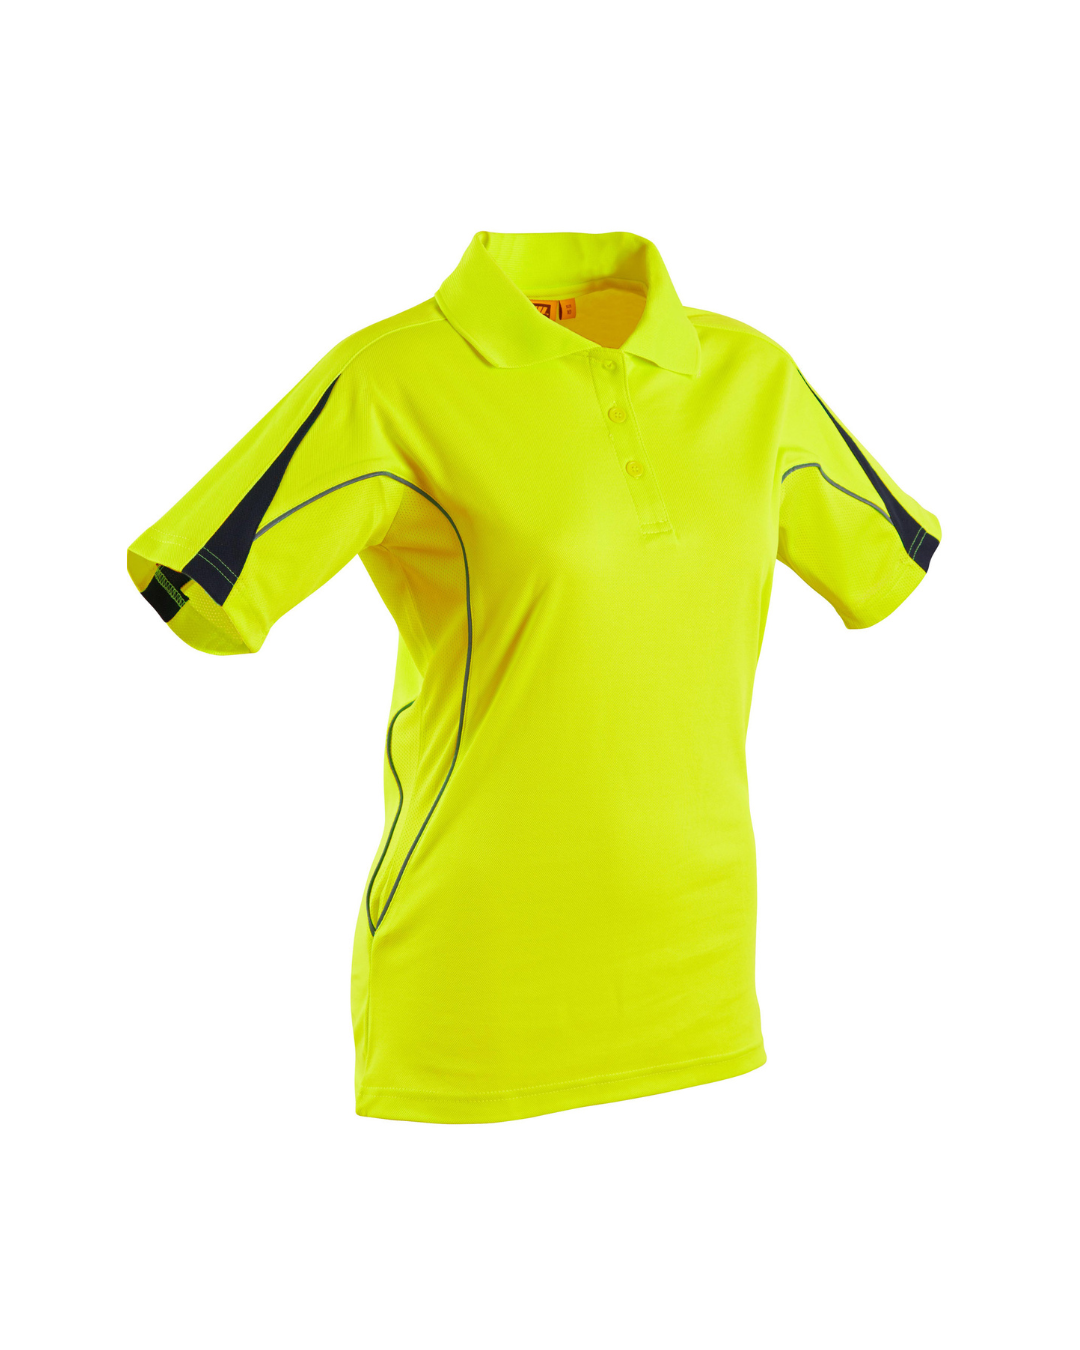 Ladies TrueDry Hi-Vis Polo with Reflective Piping (SHSW25A)